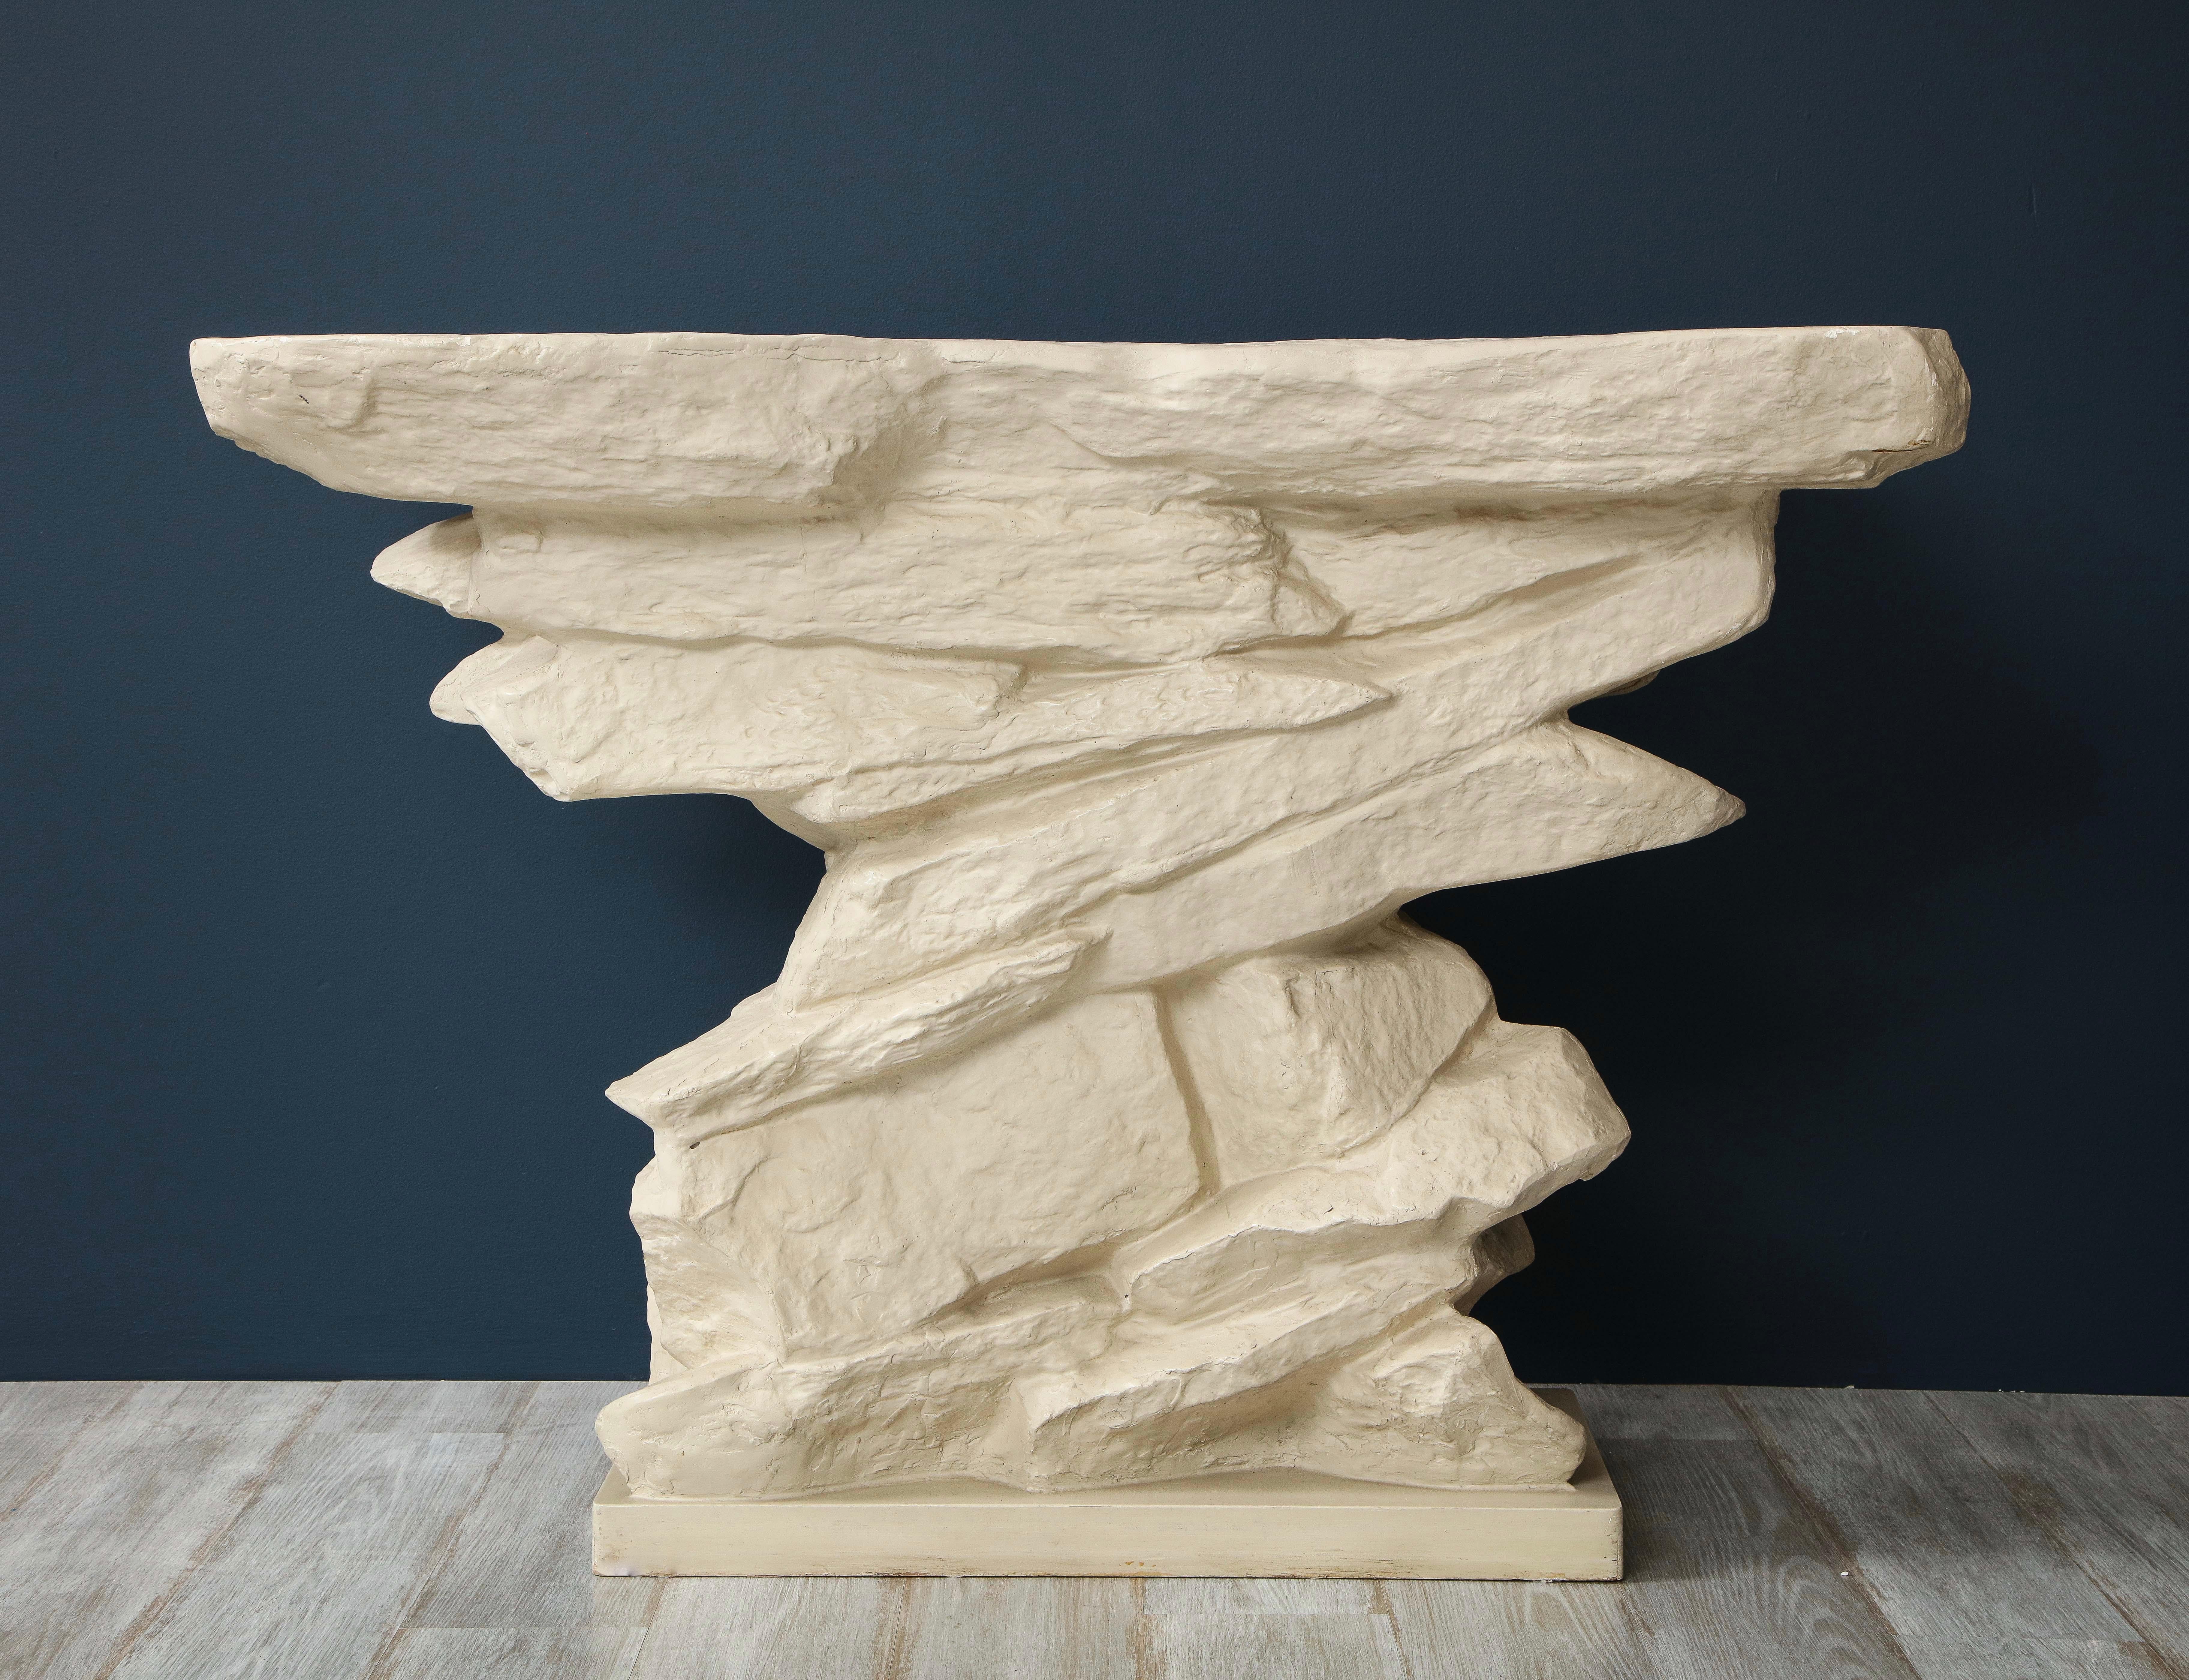 A Sirmos white painted plaster console table based on the iconic original designed by Emilio Terry in 1927. This timeless, chic console which simulates stacked rocks works with a multitude of styles including modern, transitional, midcentury and